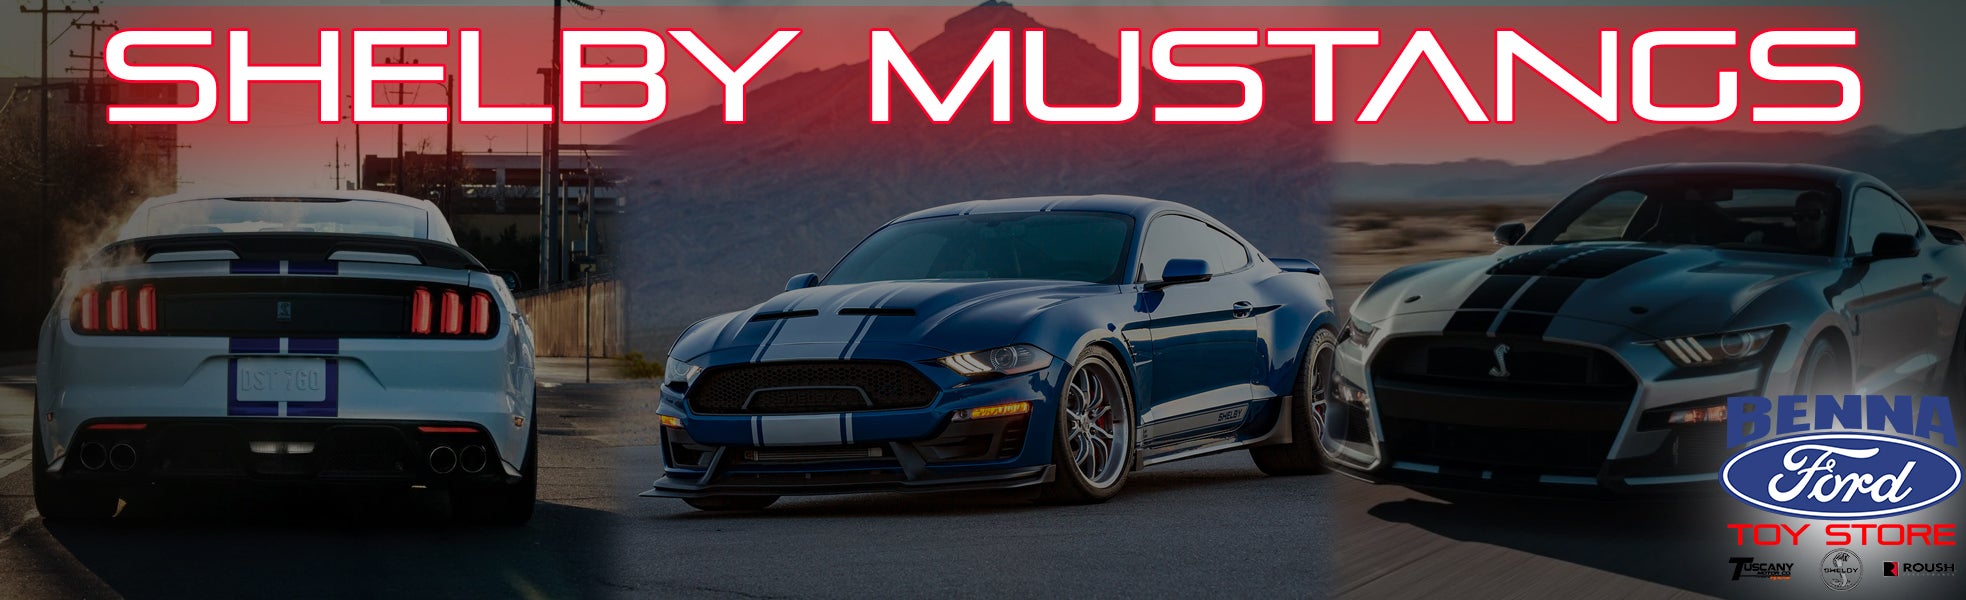 Shelby Mustangs Banner Benna Ford Toy Store